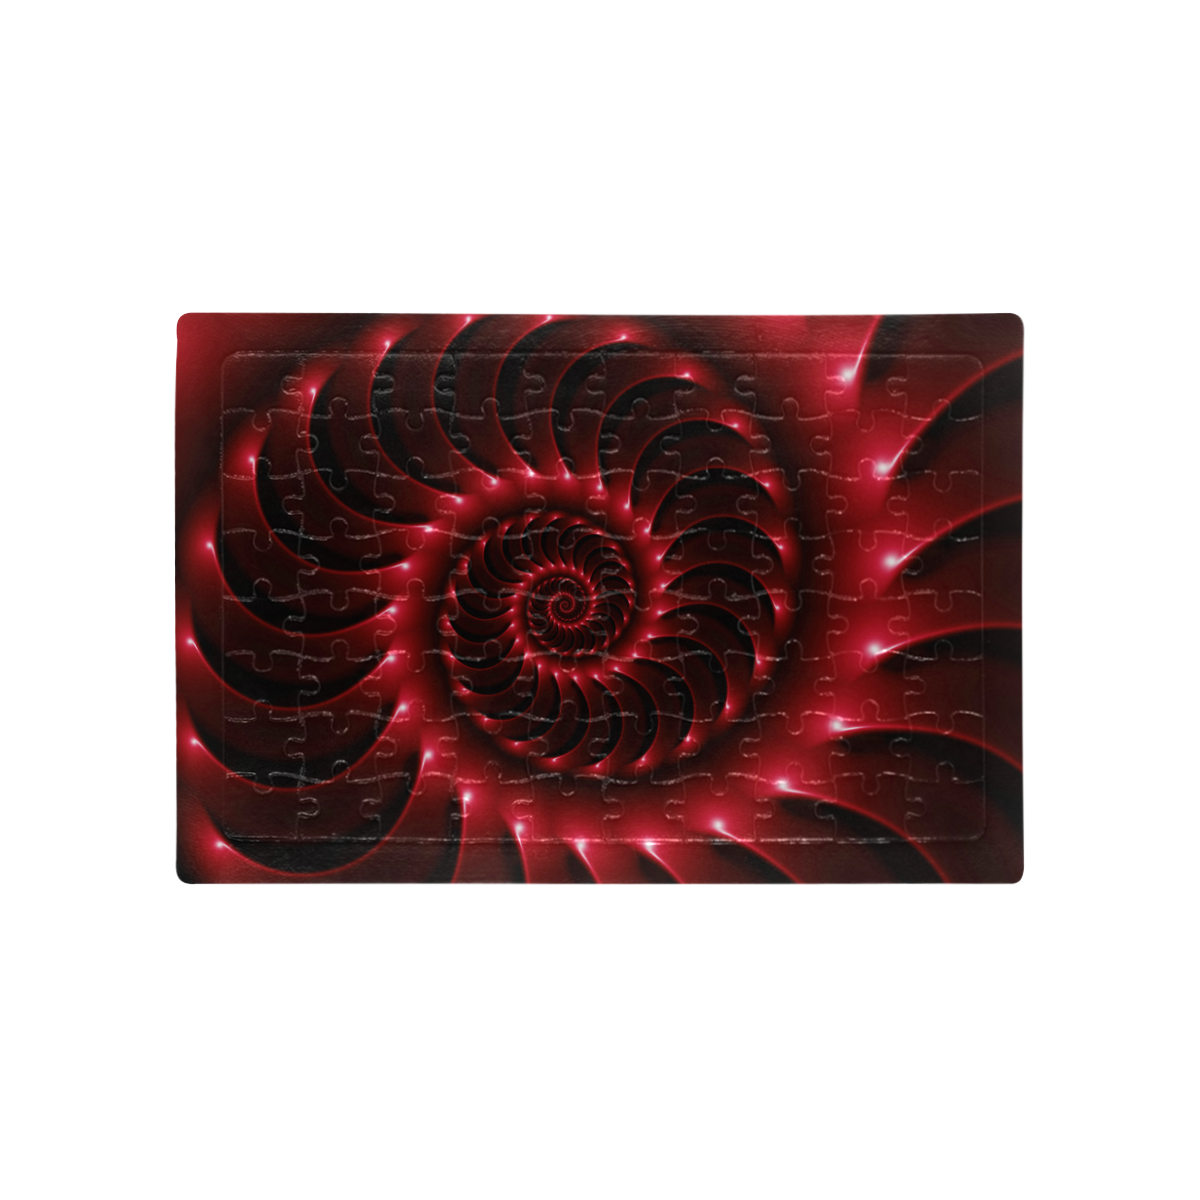 Red Spiral Fractal Puzzle A4 Size Jigsaw Puzzle (Set of 80 Pieces)